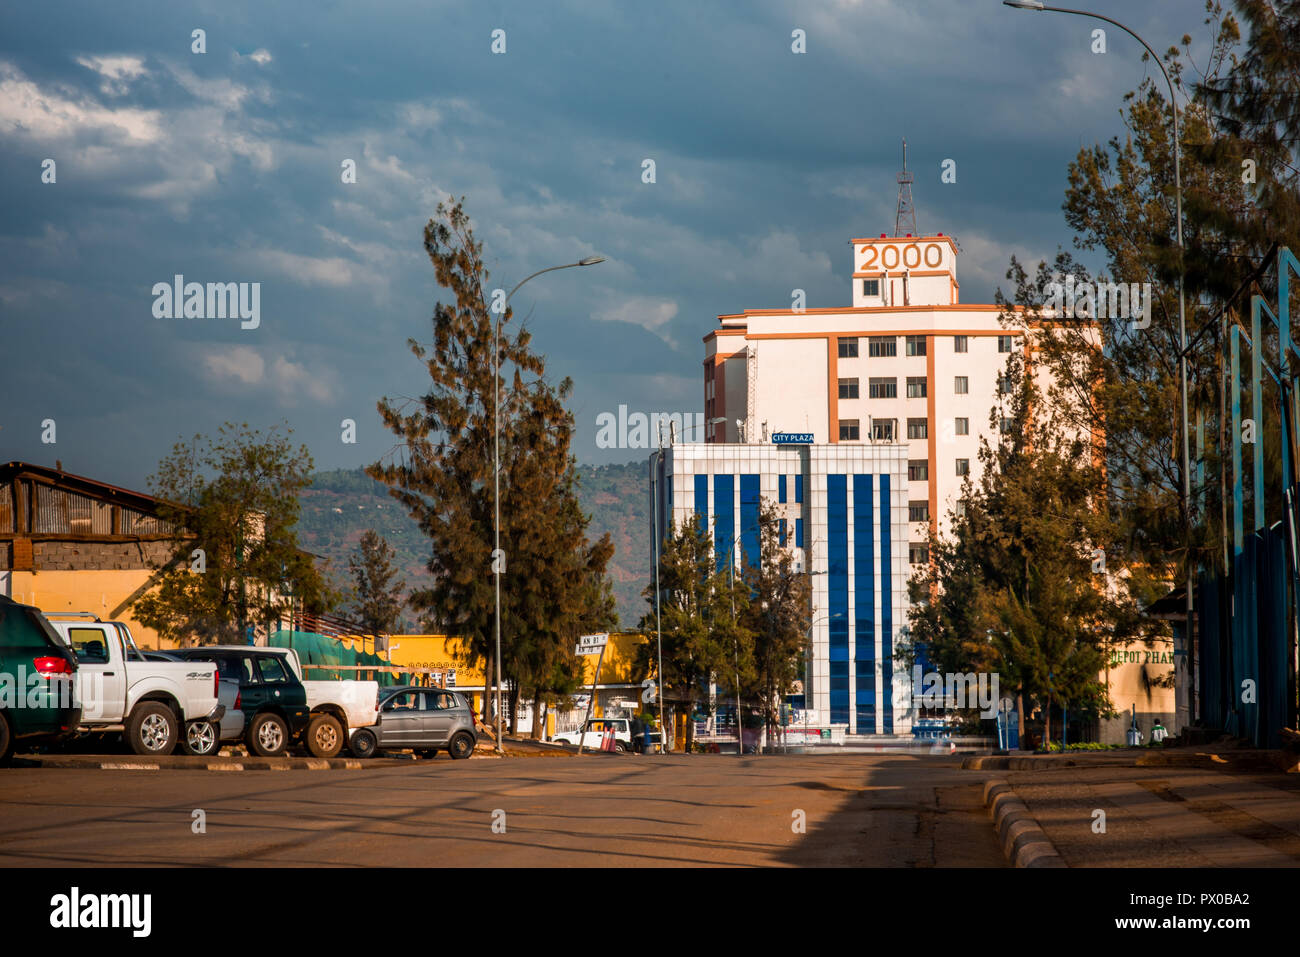 Kigali, Rwanda - September 21, 2018: House 2000, known locally as T 2000, lit up by the sun against dark clouds, viewed from street level Stock Photo